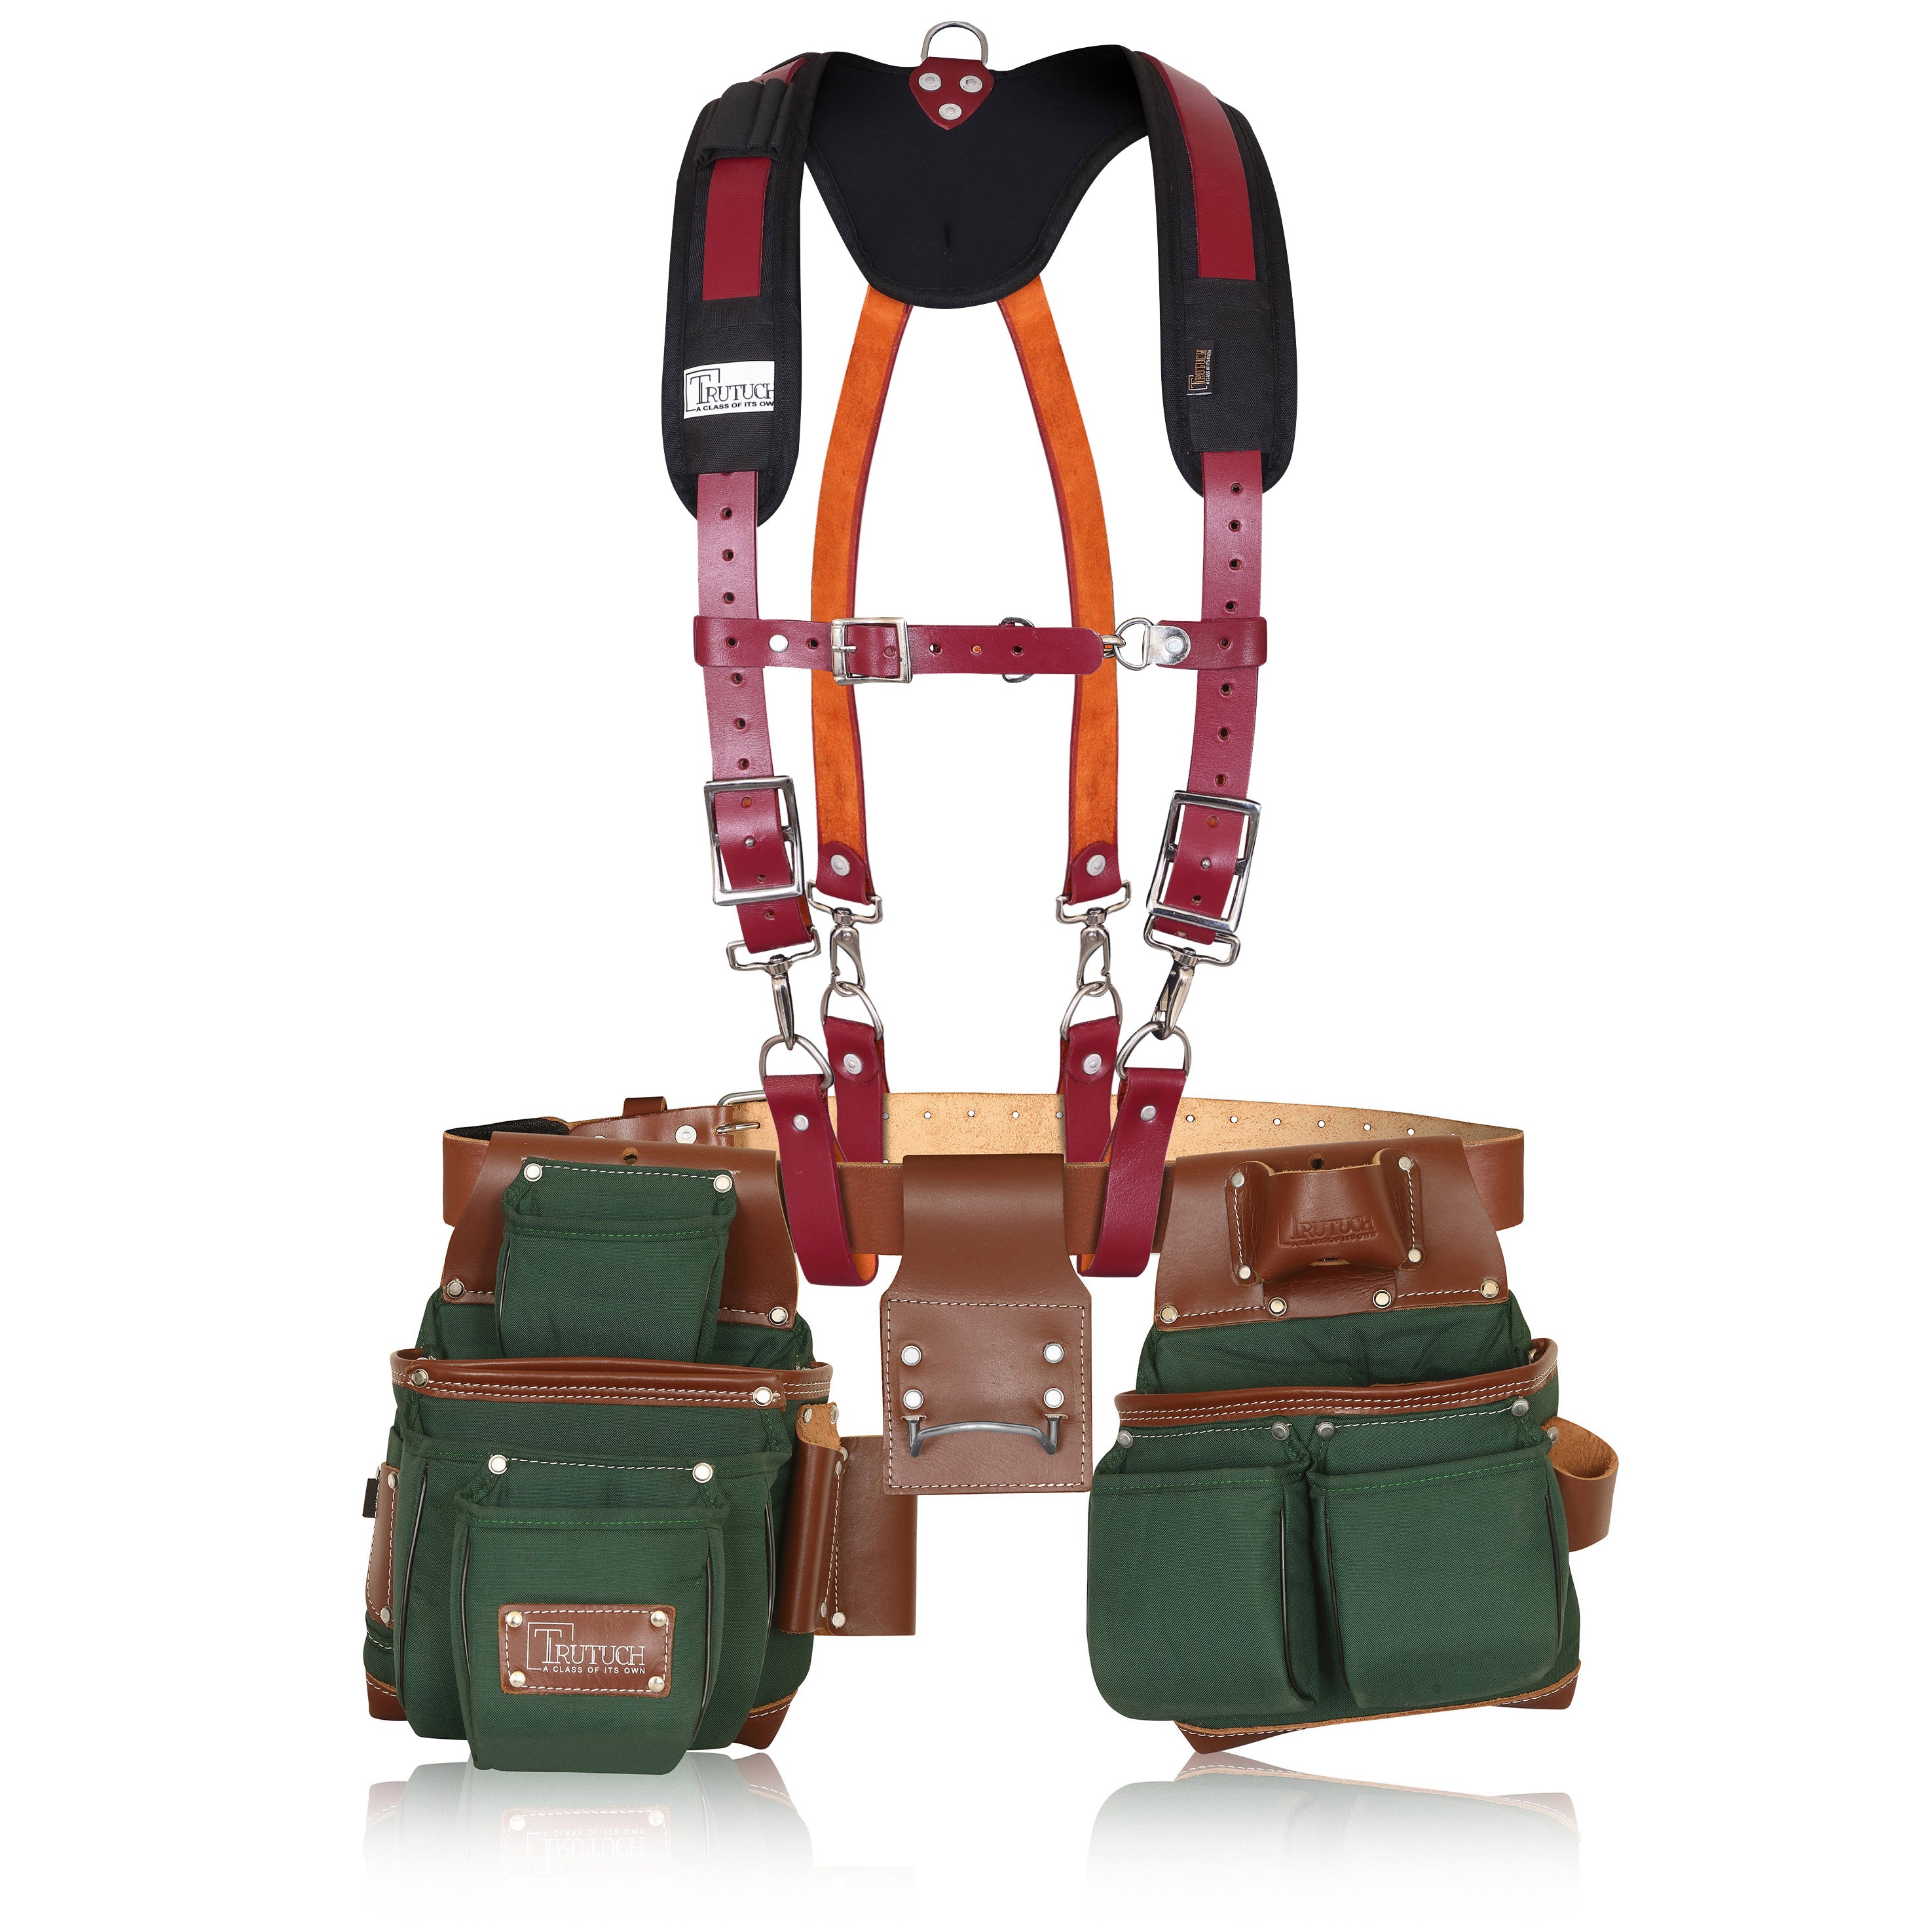 Trutuch Green Nylon & Leather Tool Belt with Leather Work Suspender, Framers Tool Belt, Electrician, Construction, Drywall Tool Belt, TT-1530-R-7010-S